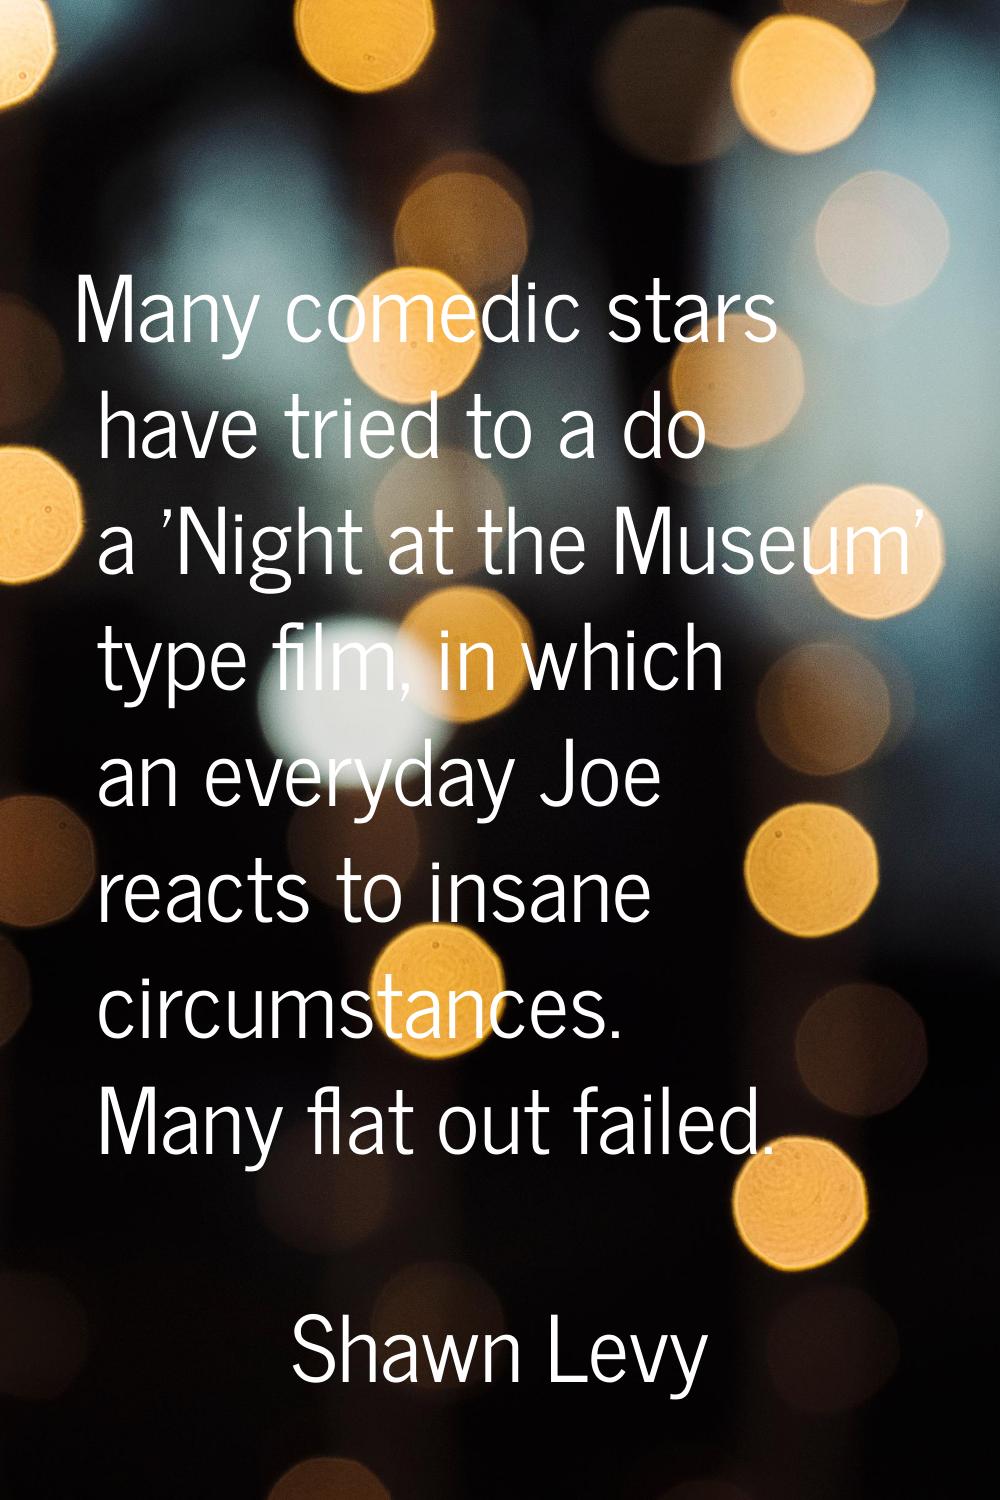 Many comedic stars have tried to a do a 'Night at the Museum' type film, in which an everyday Joe r